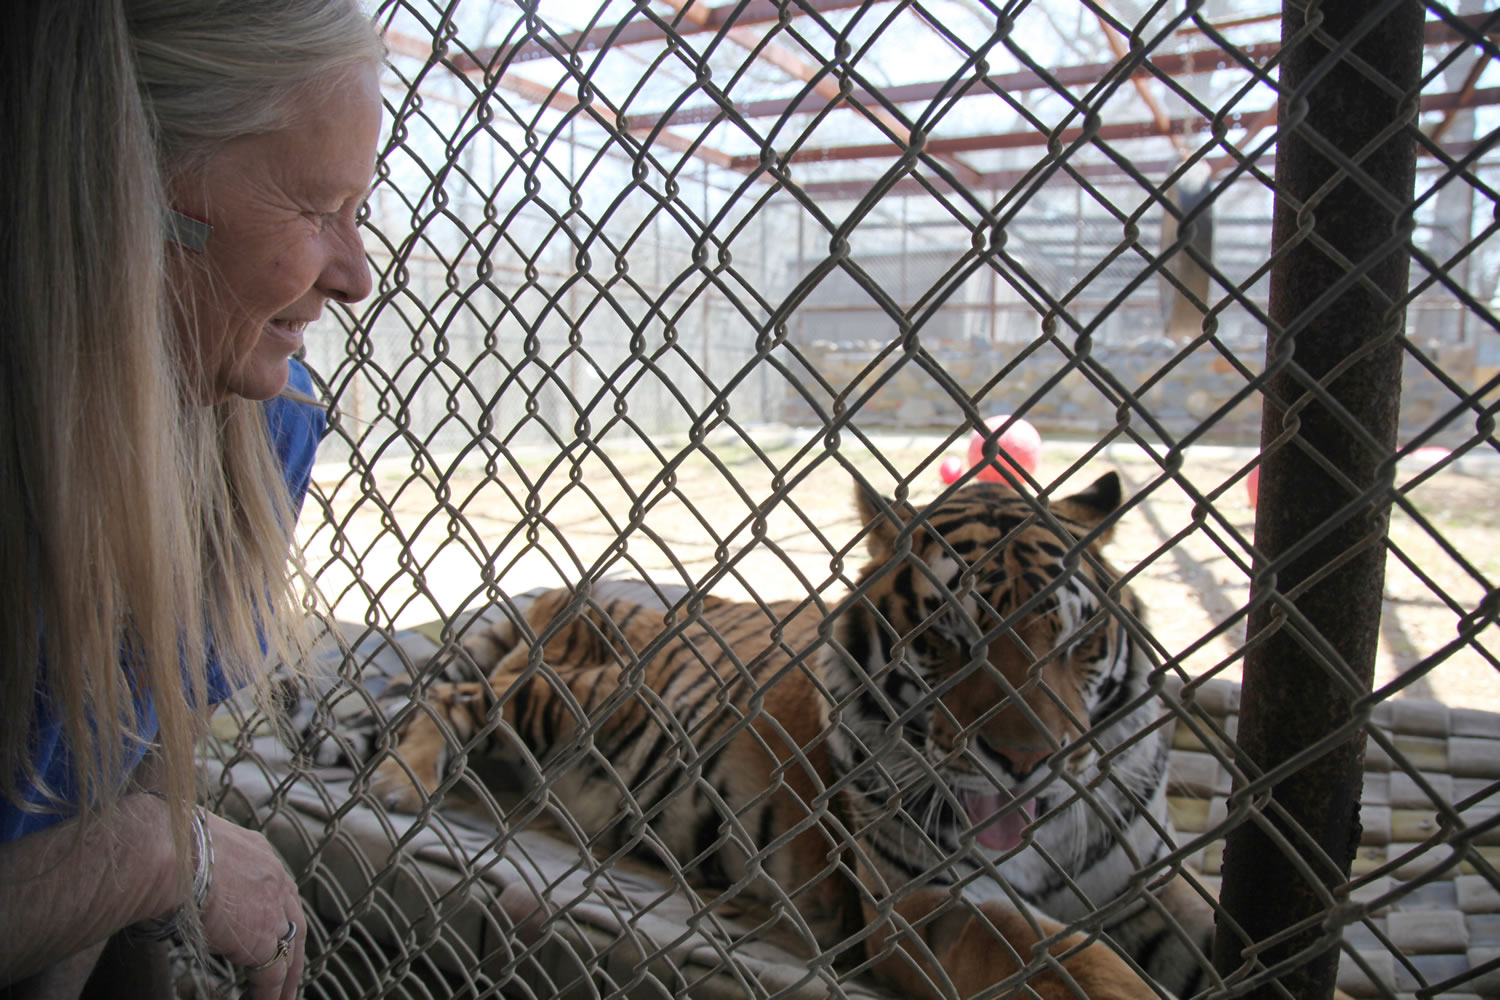 Vicky Keahy, president of InSync Exotics, visits Tacoma, a 13-year-old Siberian tiger, in his enclosure at InSync Exotics animal preserve Monday in Wylie, Texas.